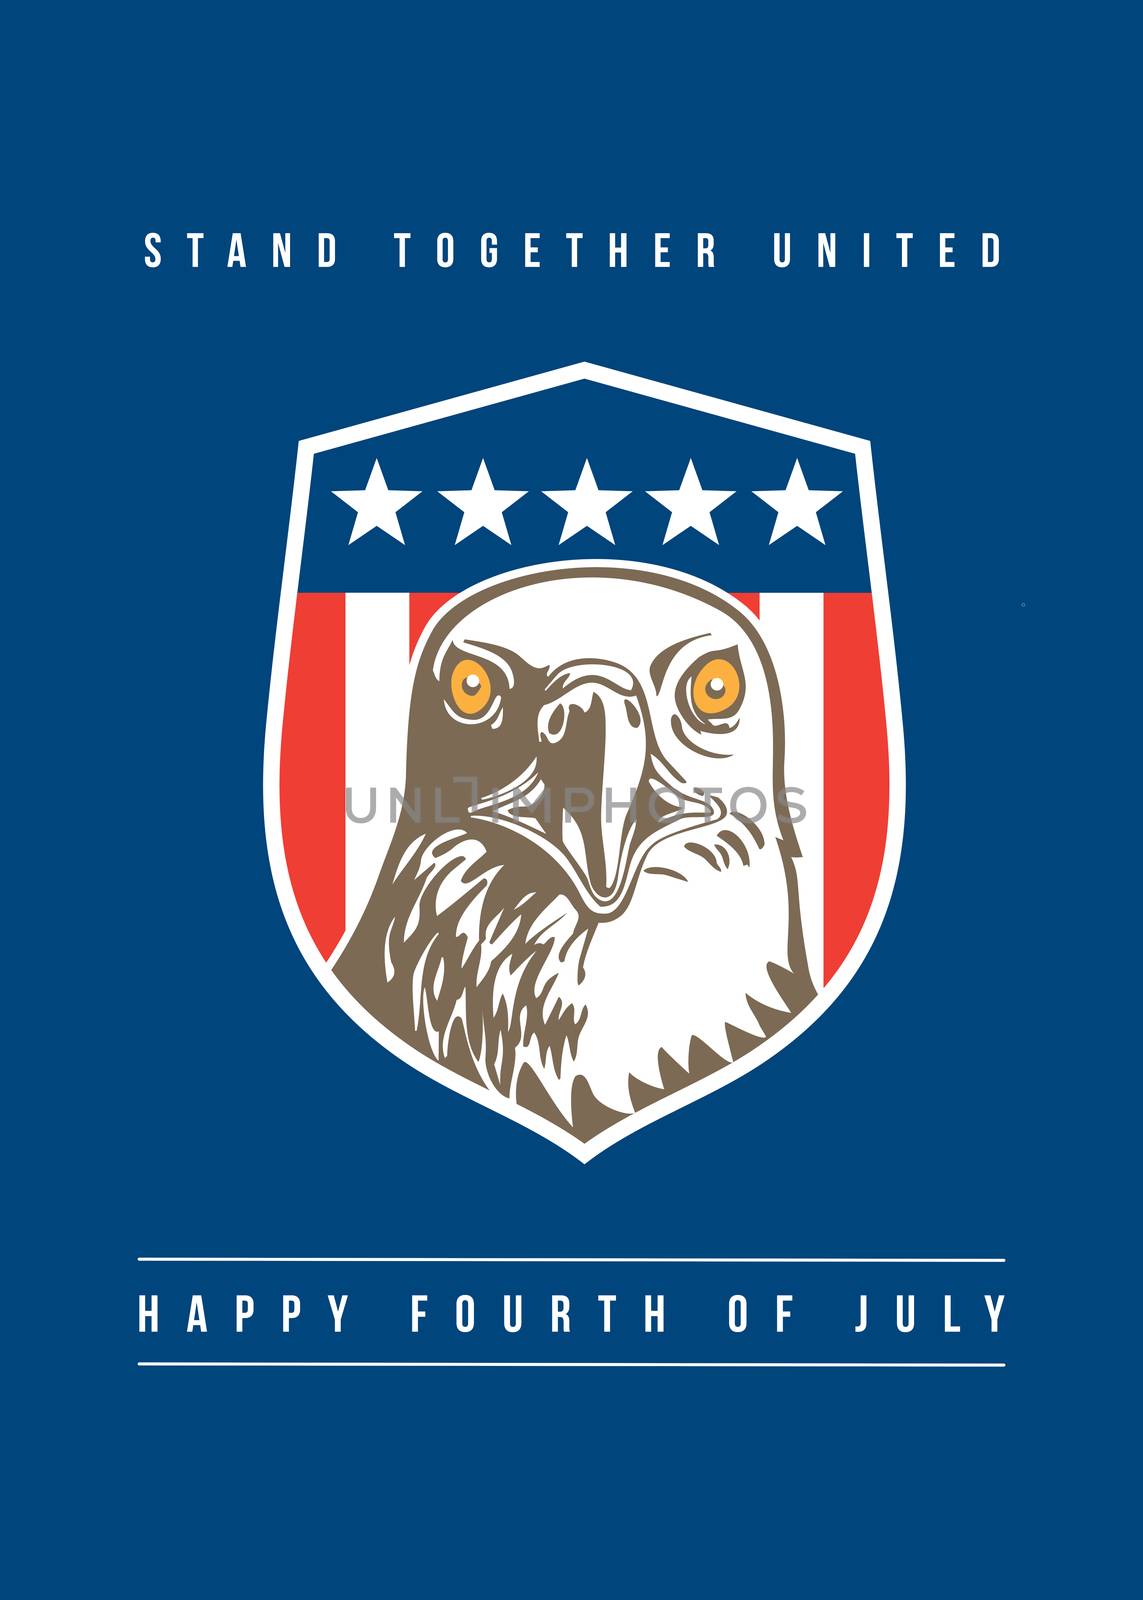 Independence Day or 4th of July greeting card featuring an illlustration of an american bald eagle head facing front set inside shield crest with usa stars and stripes flag in the background done in retro style and the words Stand Together United, Happy Fourth of July 